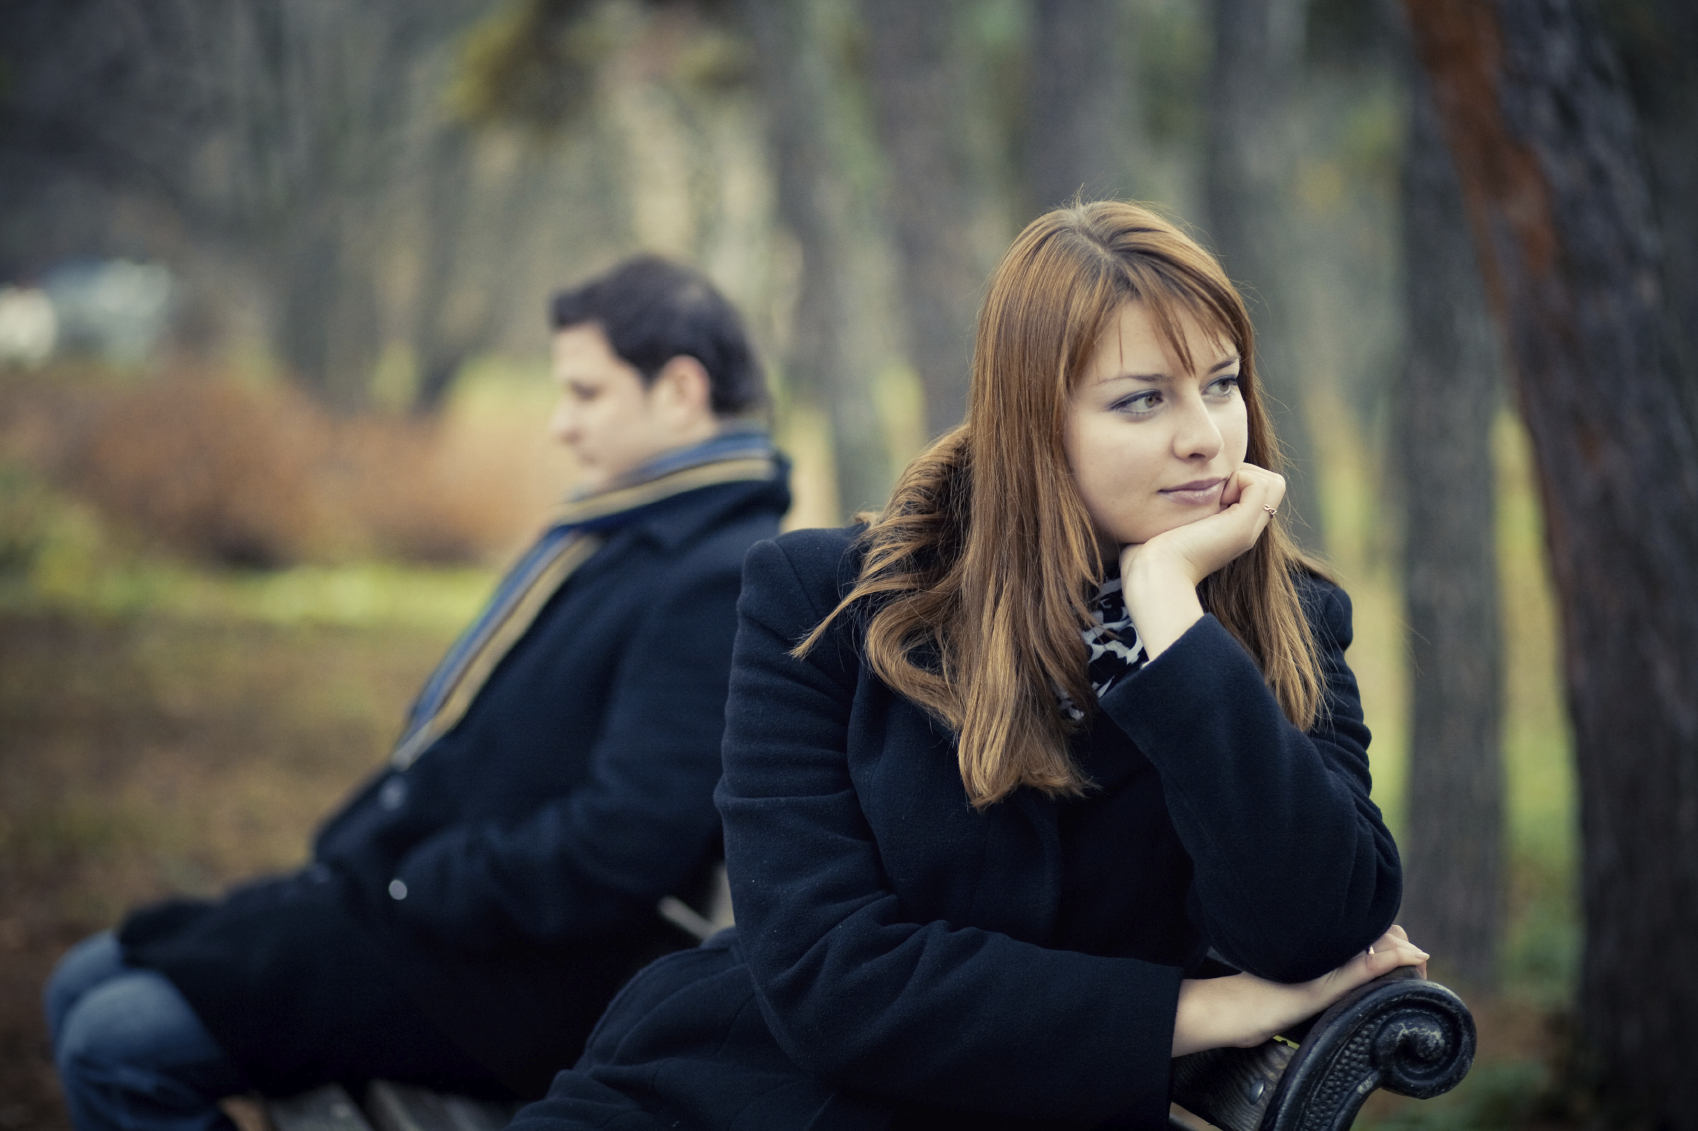 4 Relationship Red Flags For Single Moms To Watch Out For